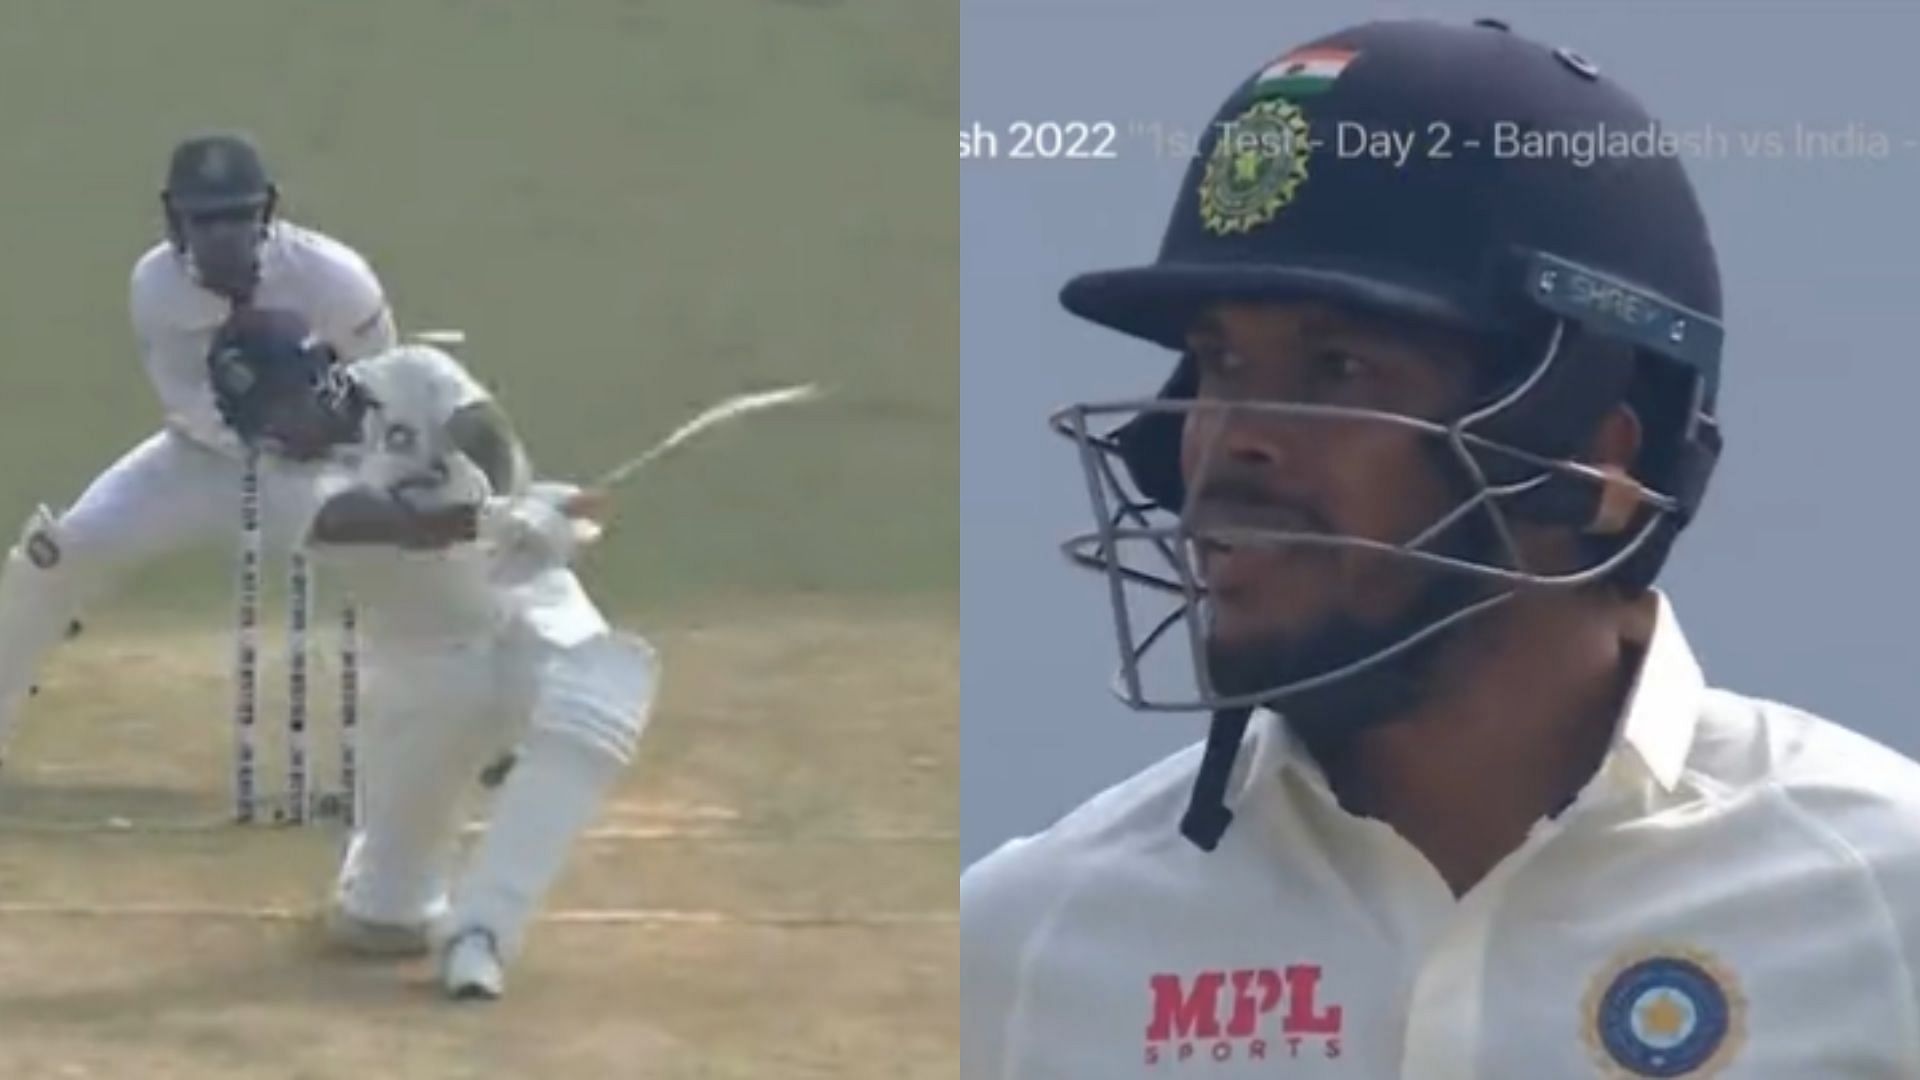 [Watch] Umesh Yadav smashes a 100m six off his second ball to get off the mark against Bangladesh 